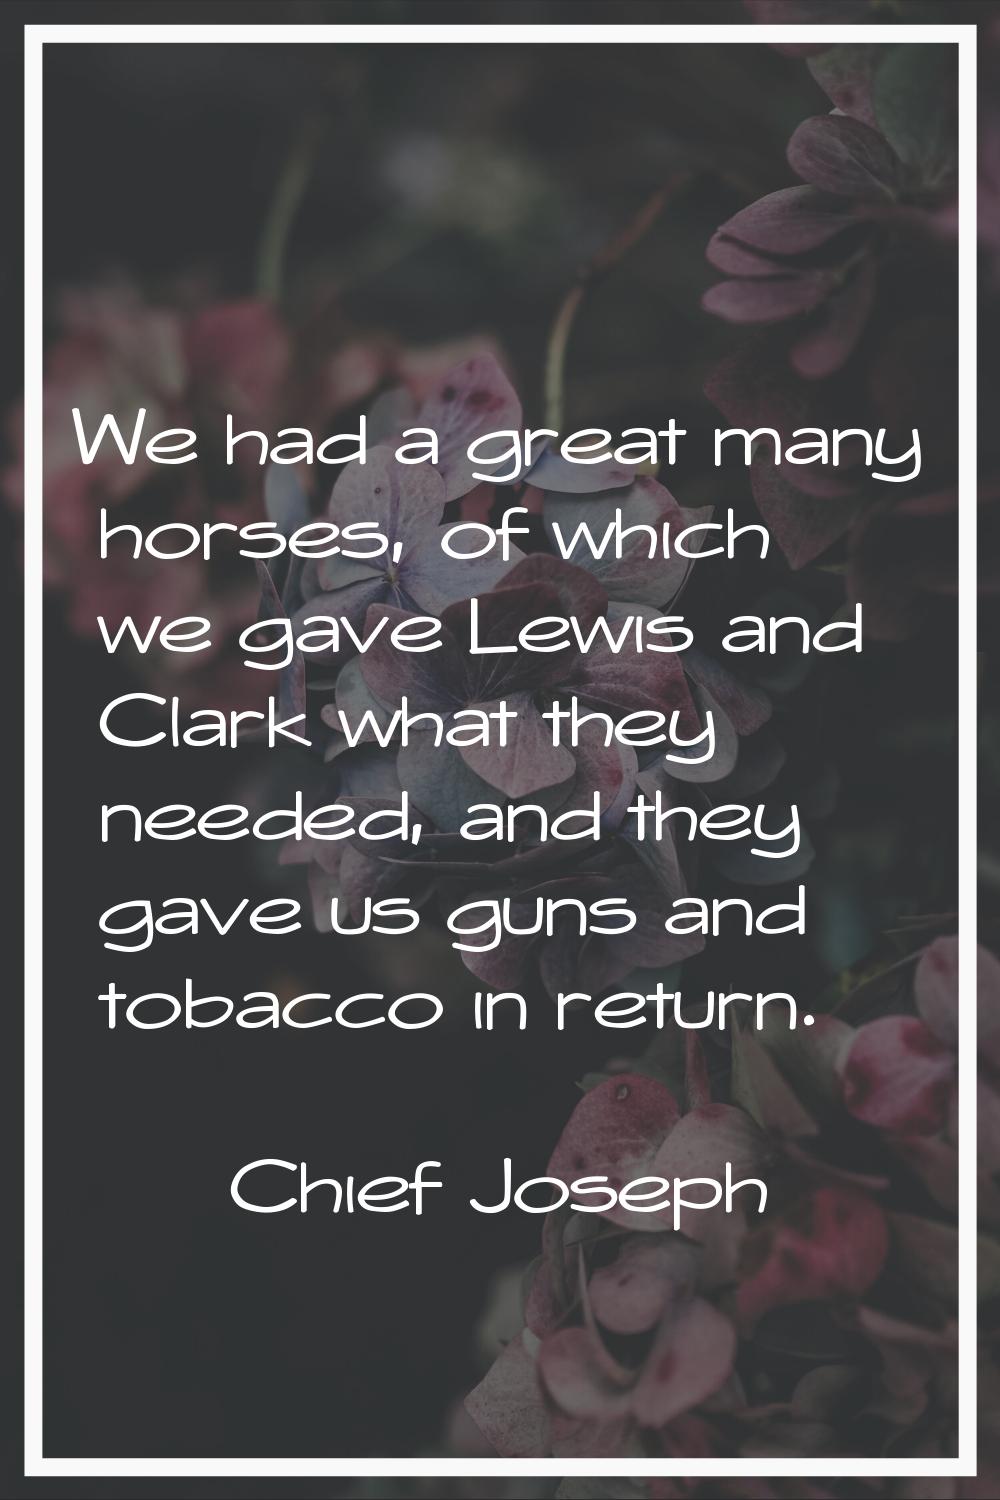 We had a great many horses, of which we gave Lewis and Clark what they needed, and they gave us gun